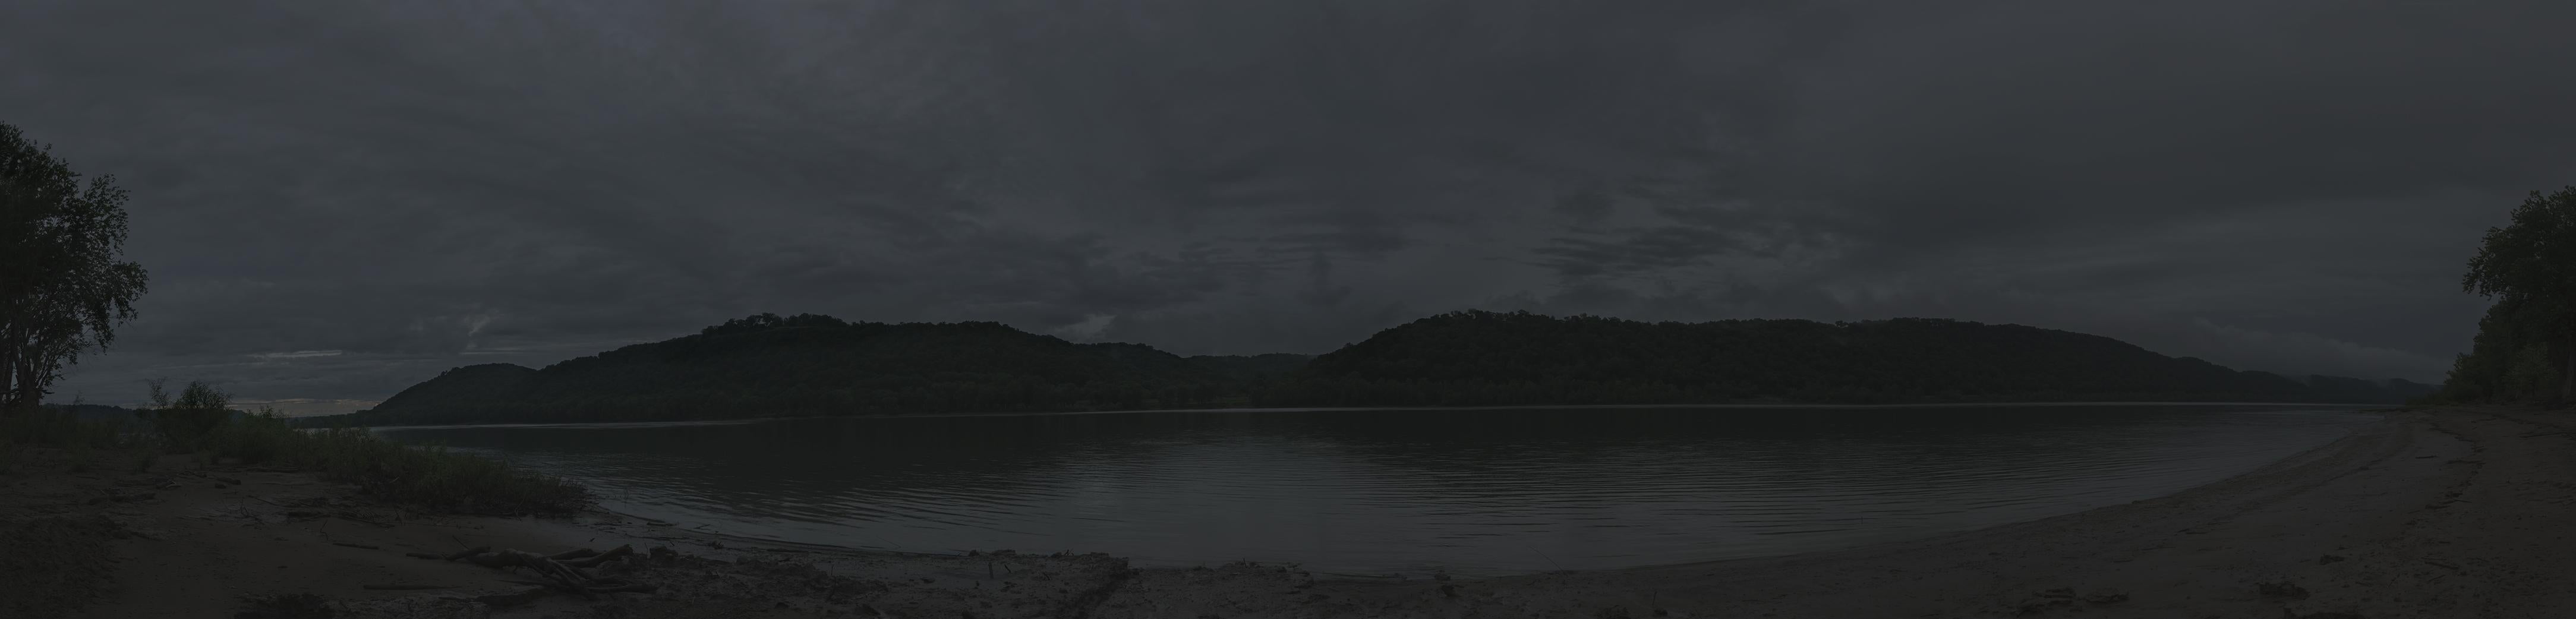 The River Jordan by Jeanine Michna-Bales, 2014, Digital C-Print, Panorama For Sale 1